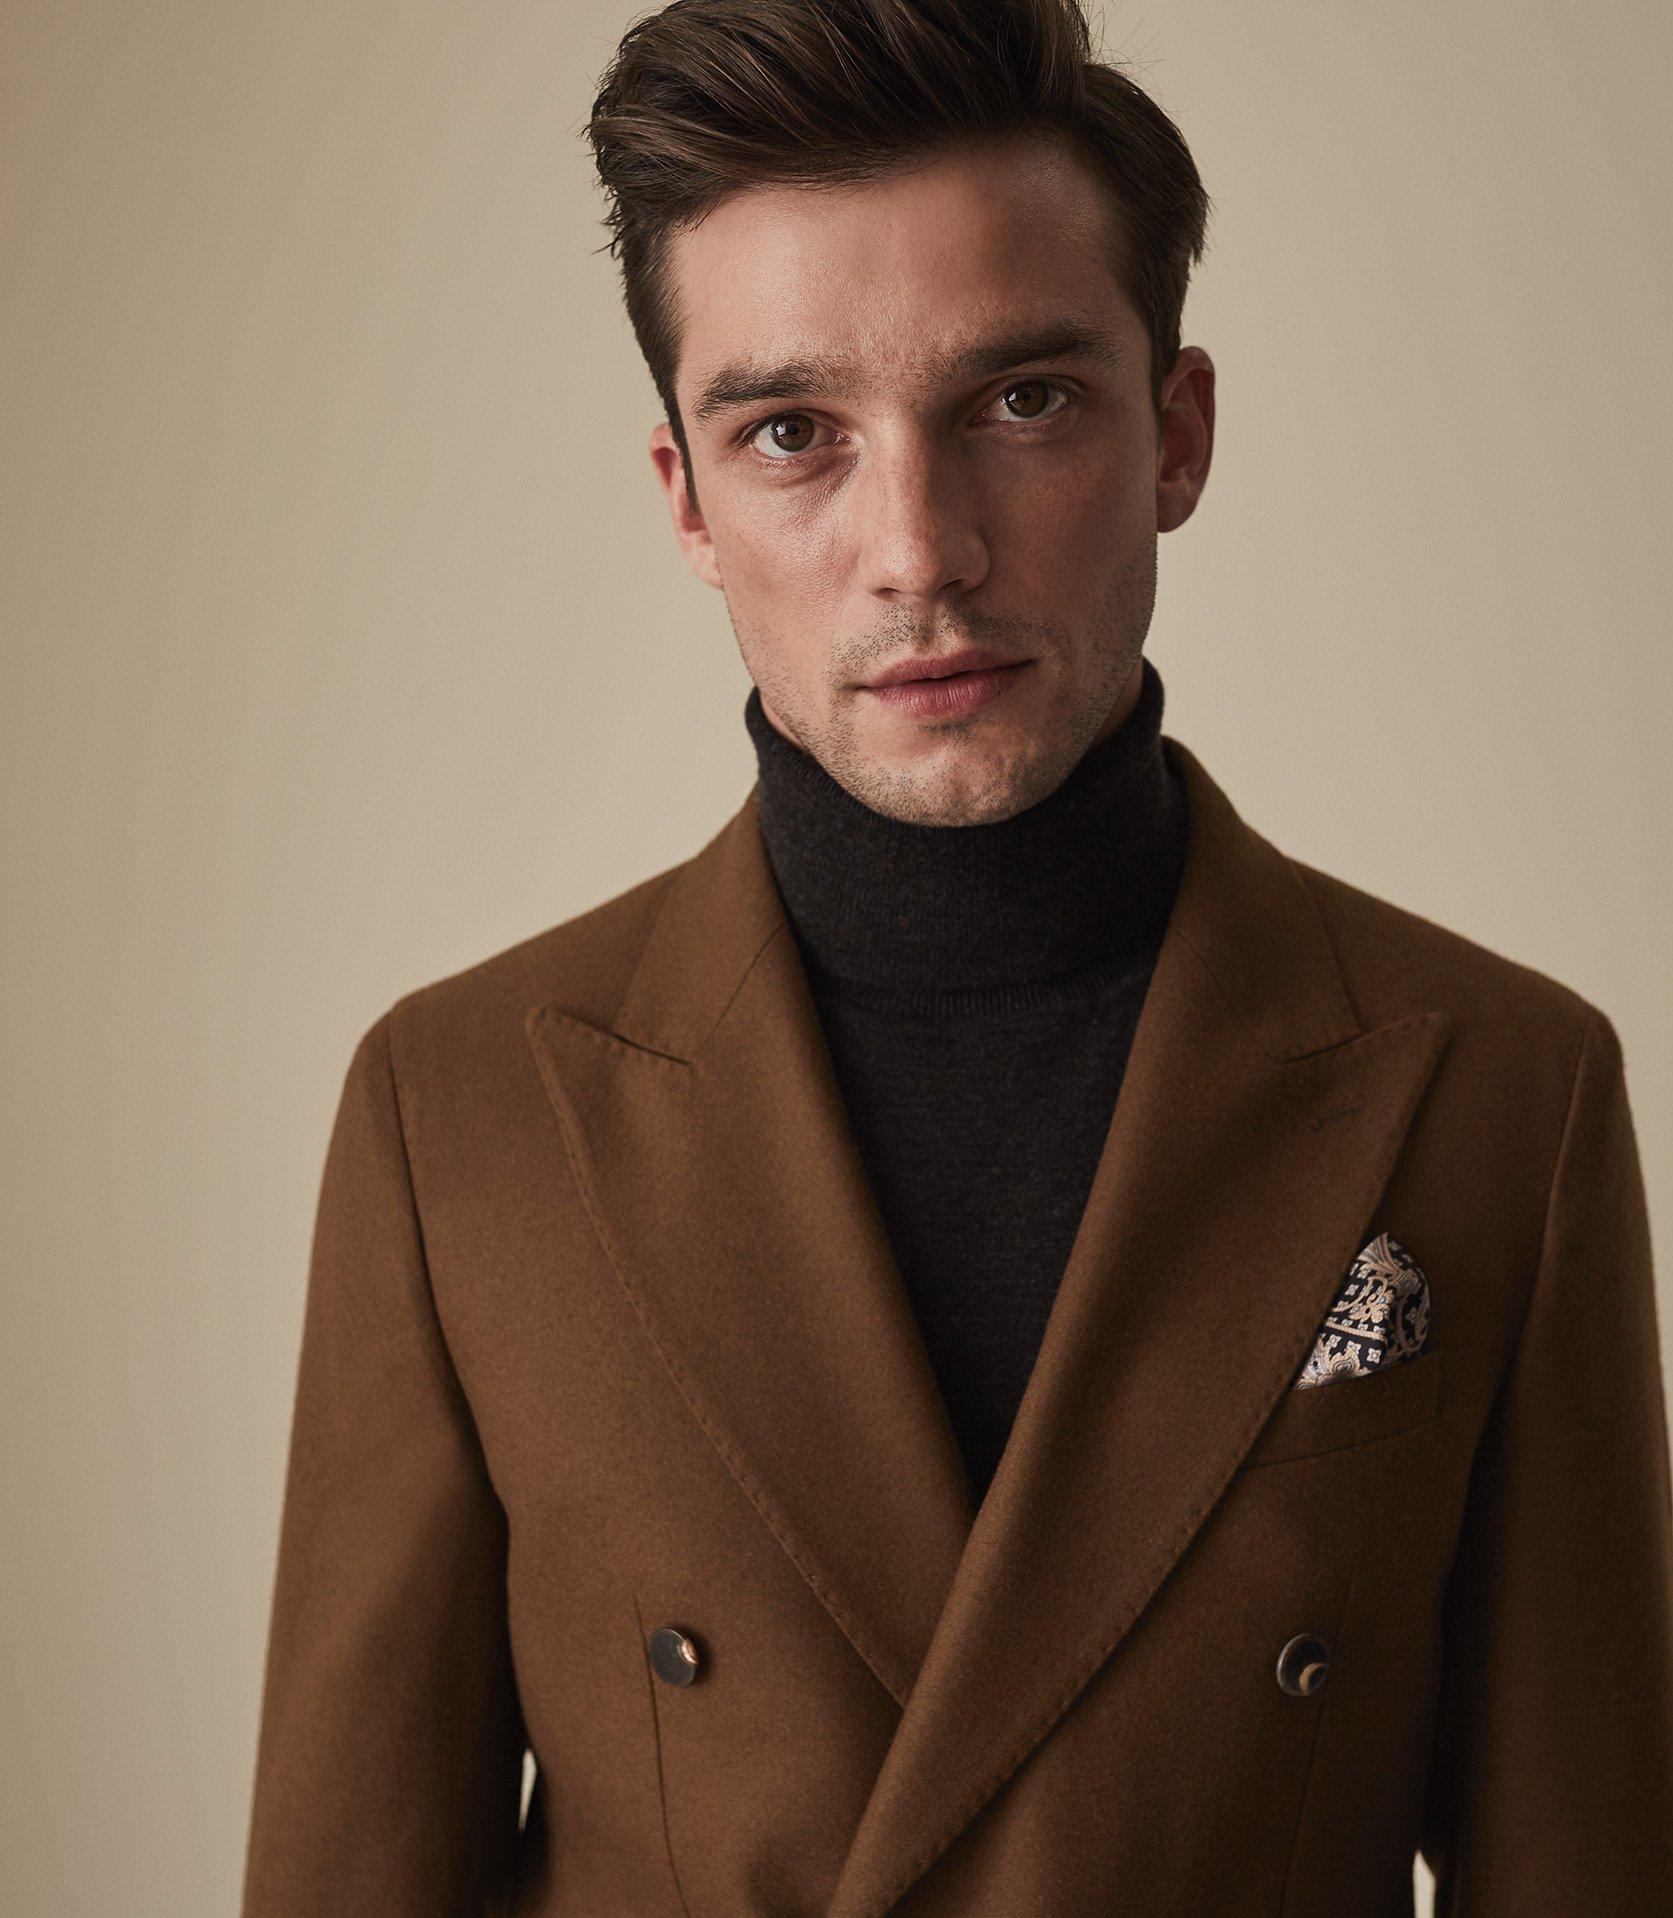 Reiss Wool Magnum - Double Breasted Blazer in Copper (Brown) for Men - Lyst